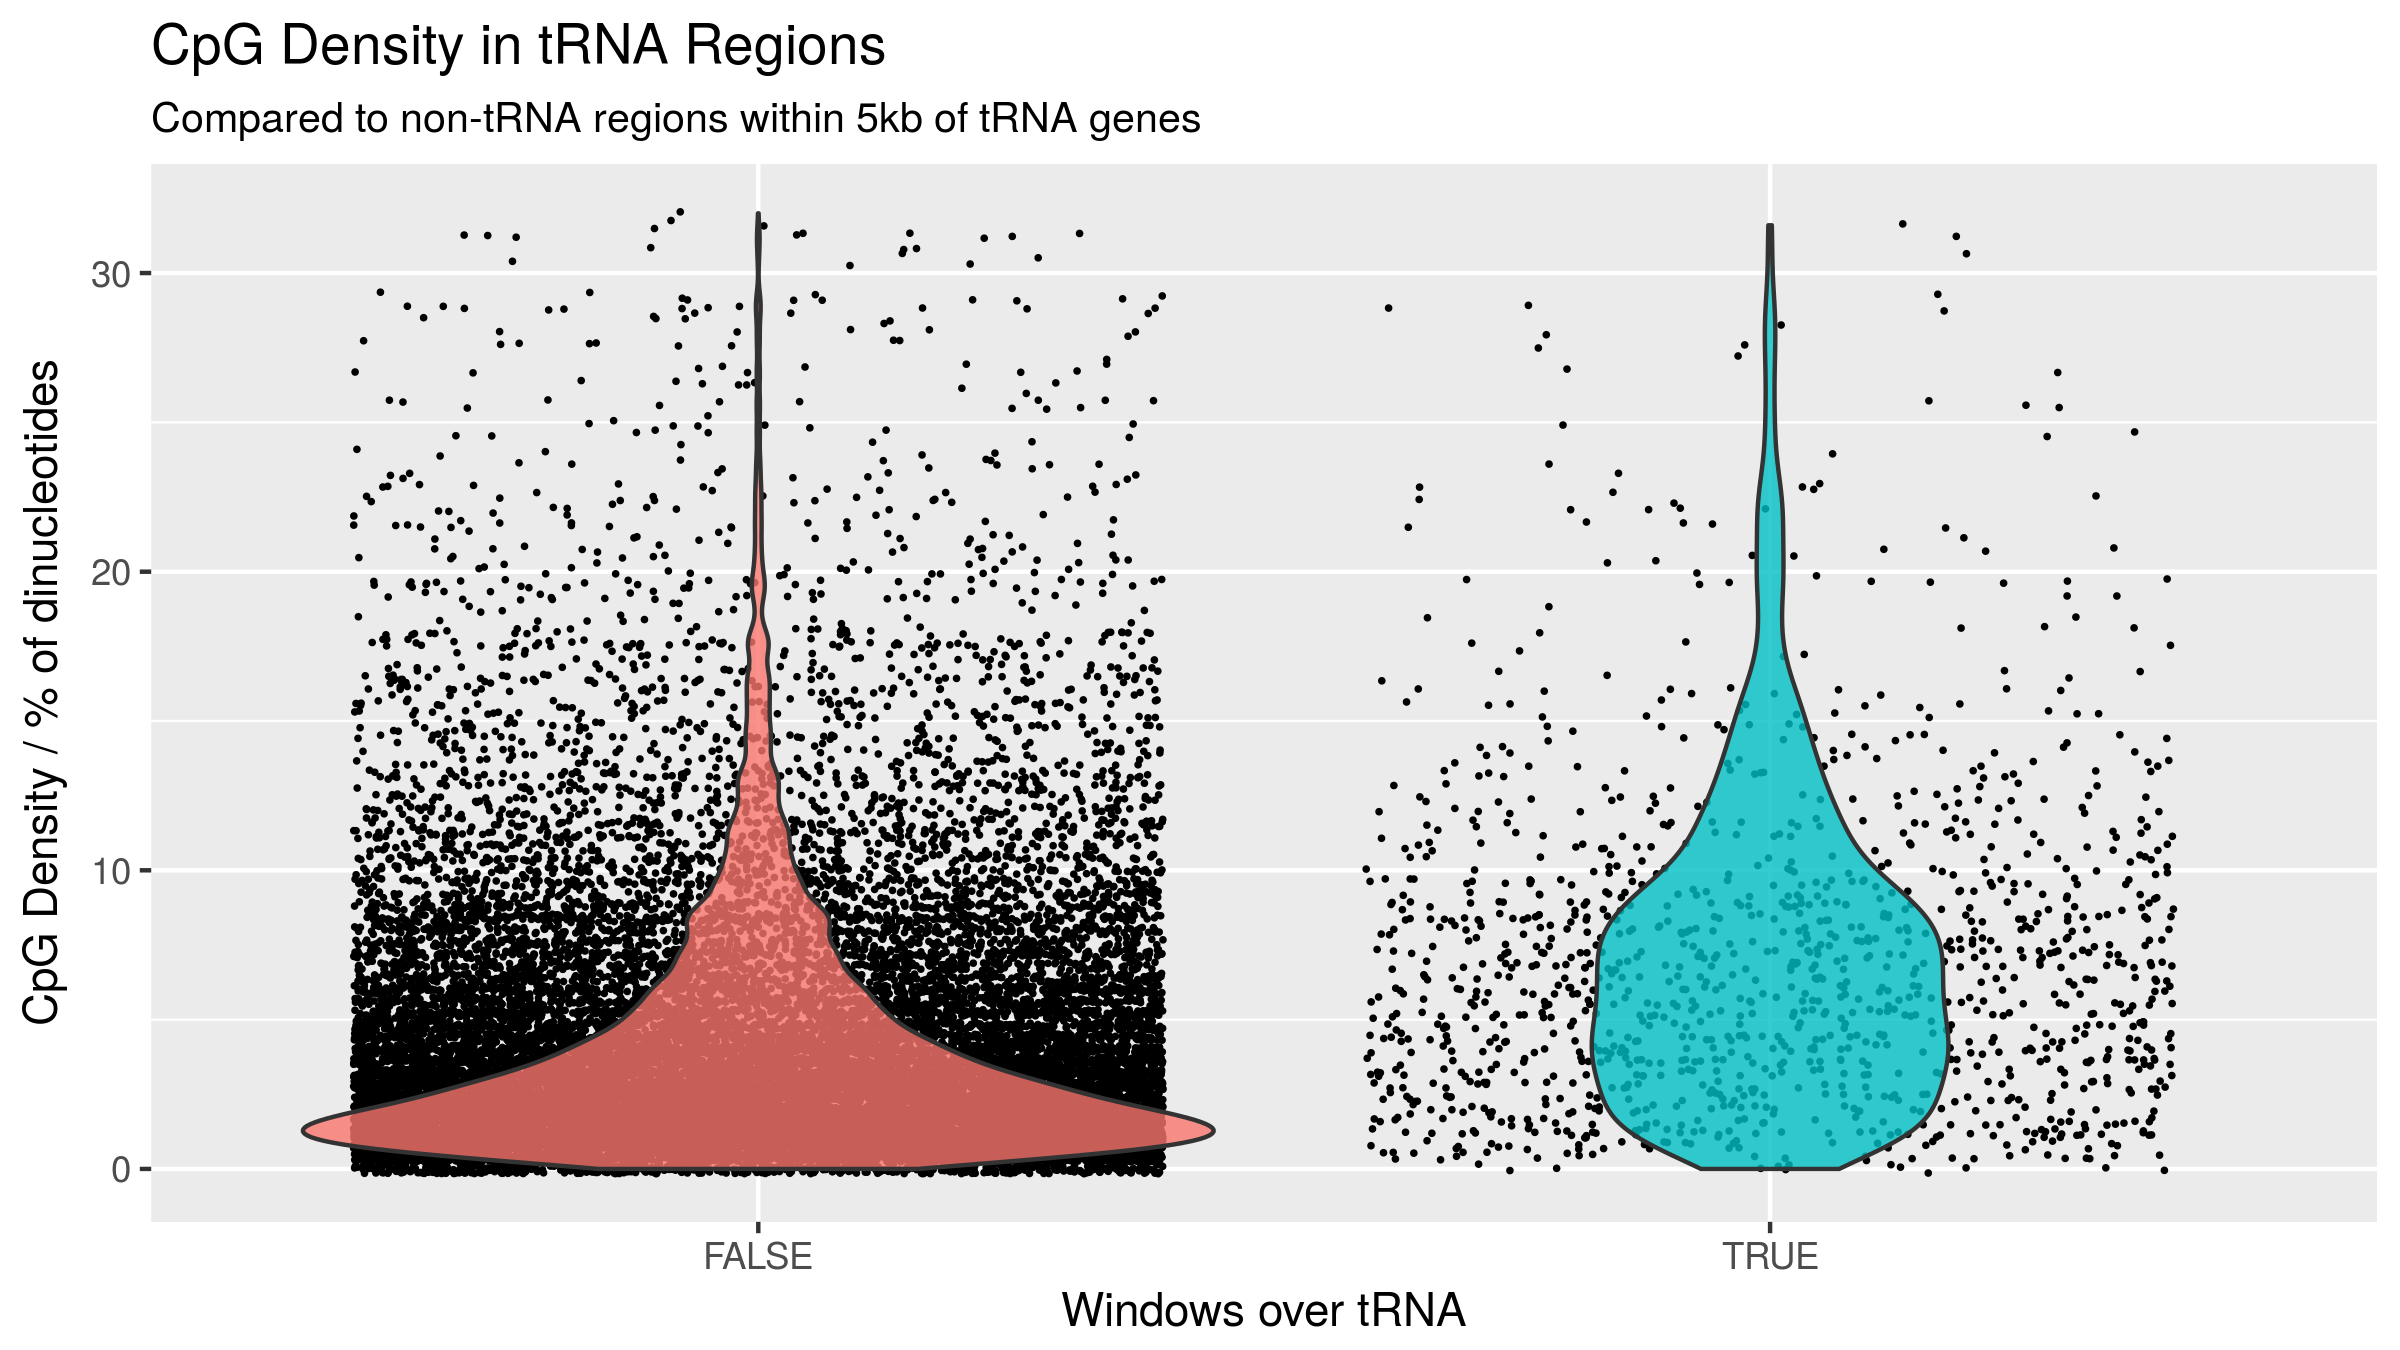 CpG Density is higher in windows directly overlapping tRNA genes compared to that of non-tRNA overlapping windows in arbitrary flanking sequences (+/-5kb). This difference in CpG density between tRNA loci and other regions of the genome is a potential source of bias if age related DNA methylation changes vary with CpG density which they may as baseline DNA methylation levels also vary with CpG density.